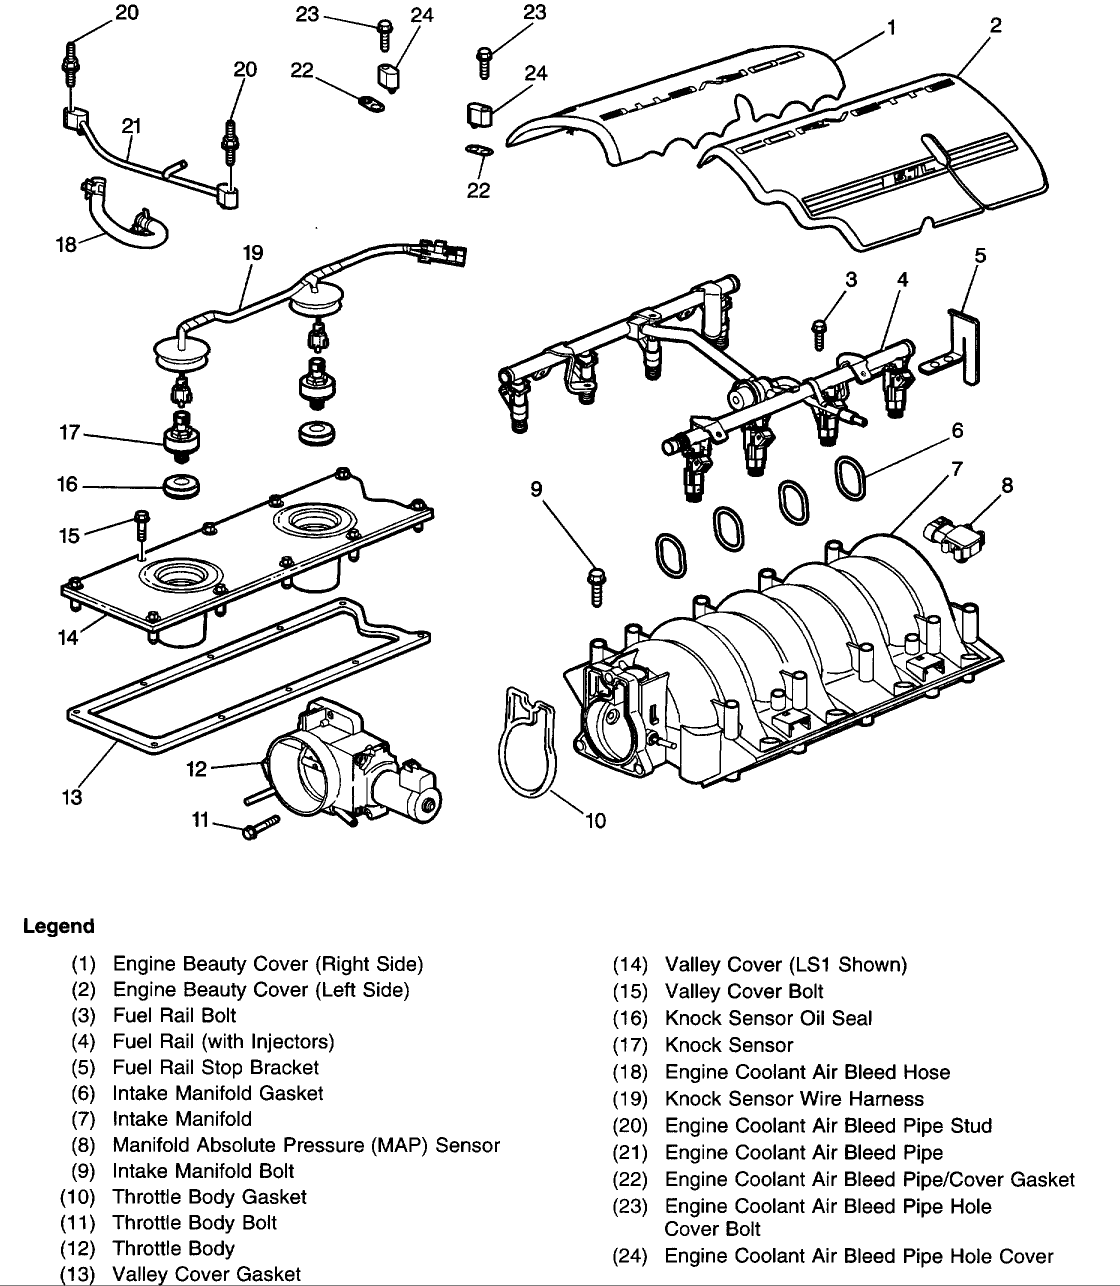 2002 Lincoln Ls Car Stereo Wiring Diagram from ls1tech.com